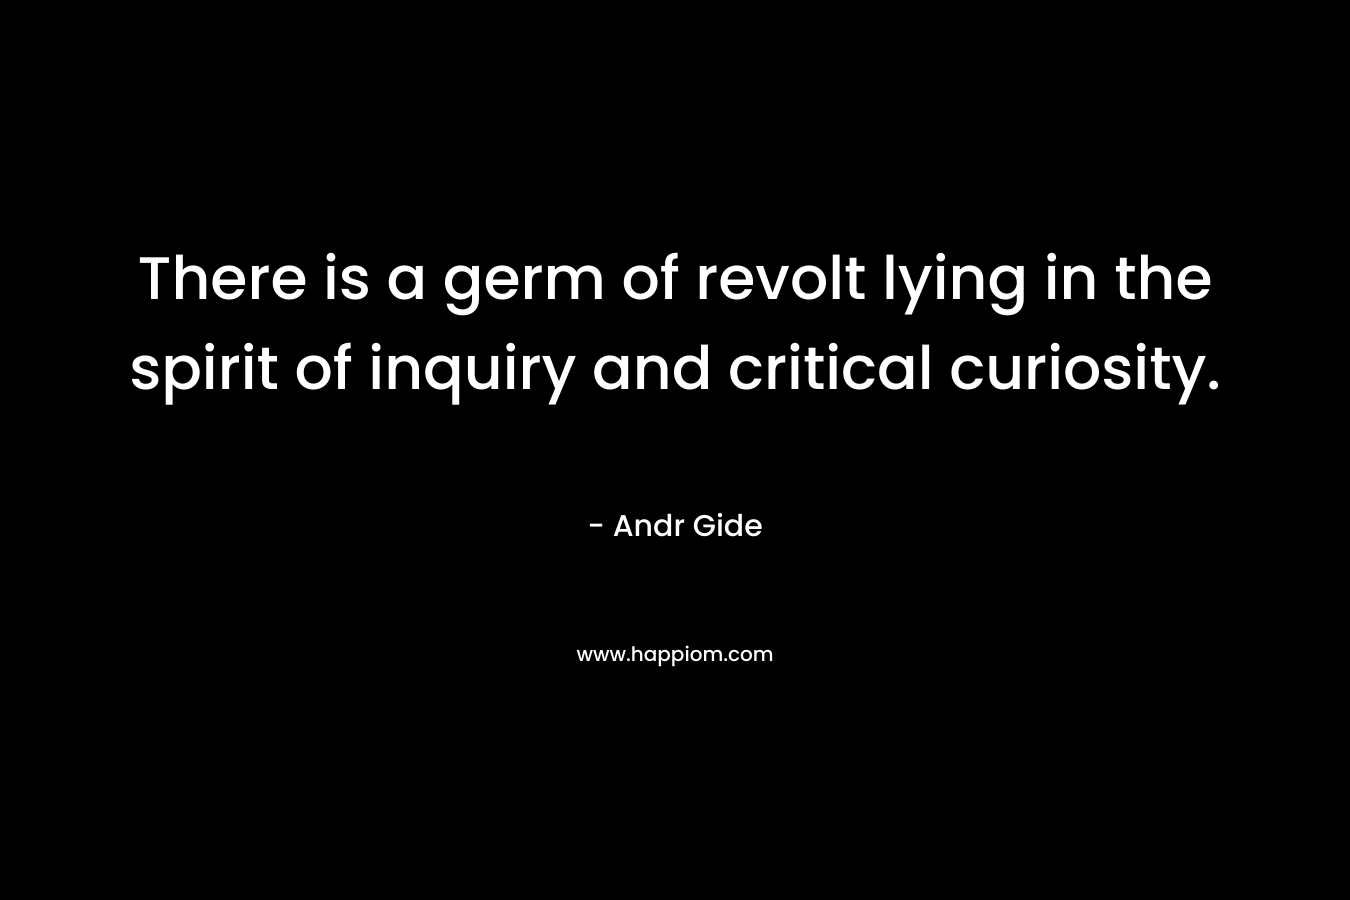 There is a germ of revolt lying in the spirit of inquiry and critical curiosity.